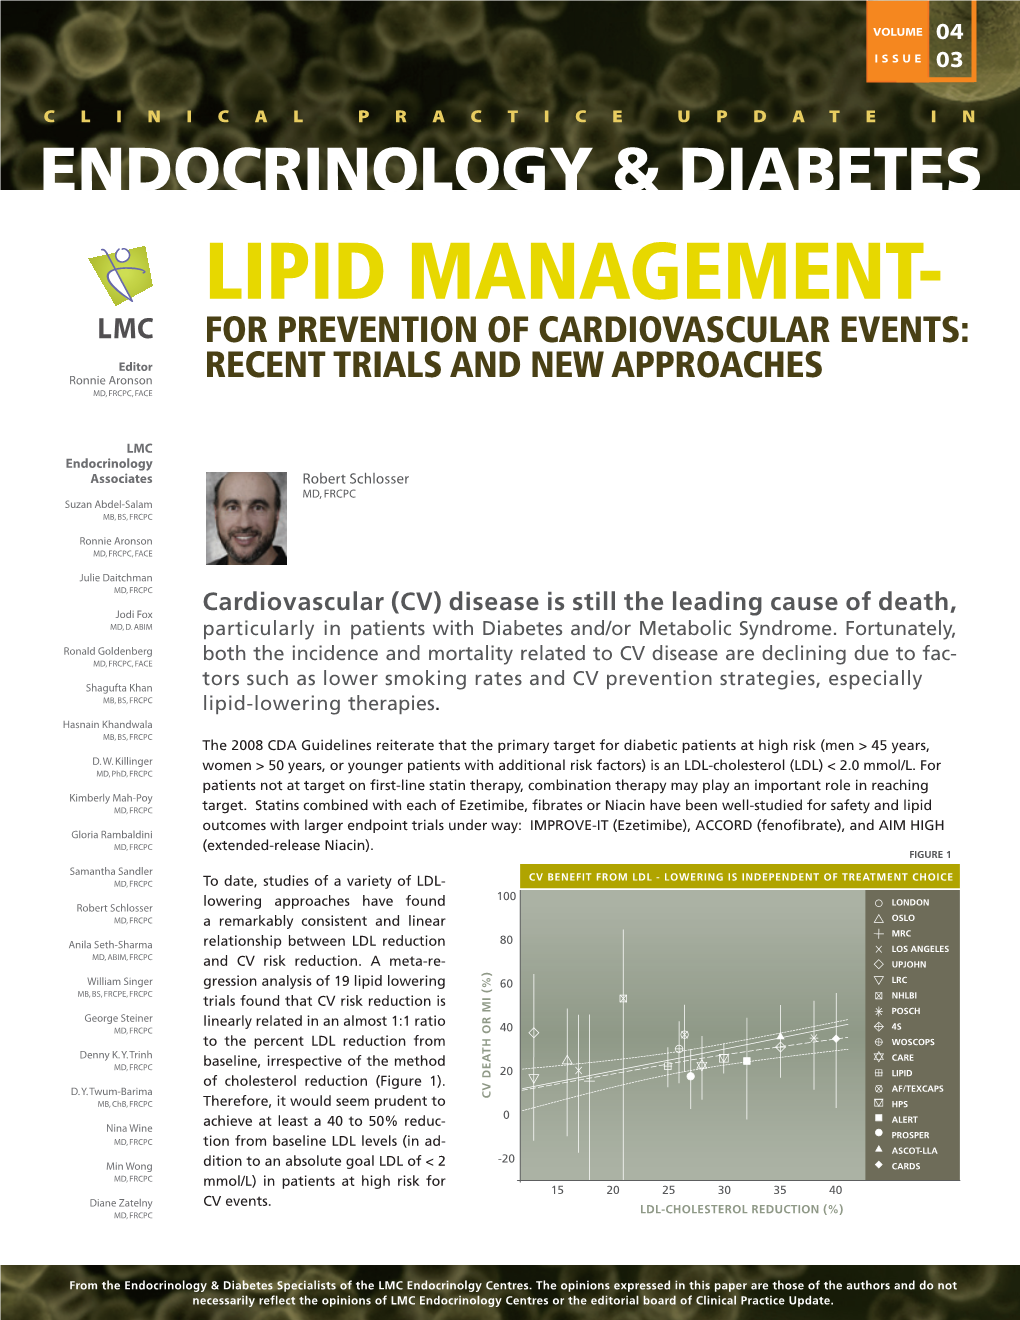 Lipid Management- for Prevention of Cardiovascular Events: Editor Ronnie Aronson Recent Trials and New Approaches MD, FRCPC, FACE